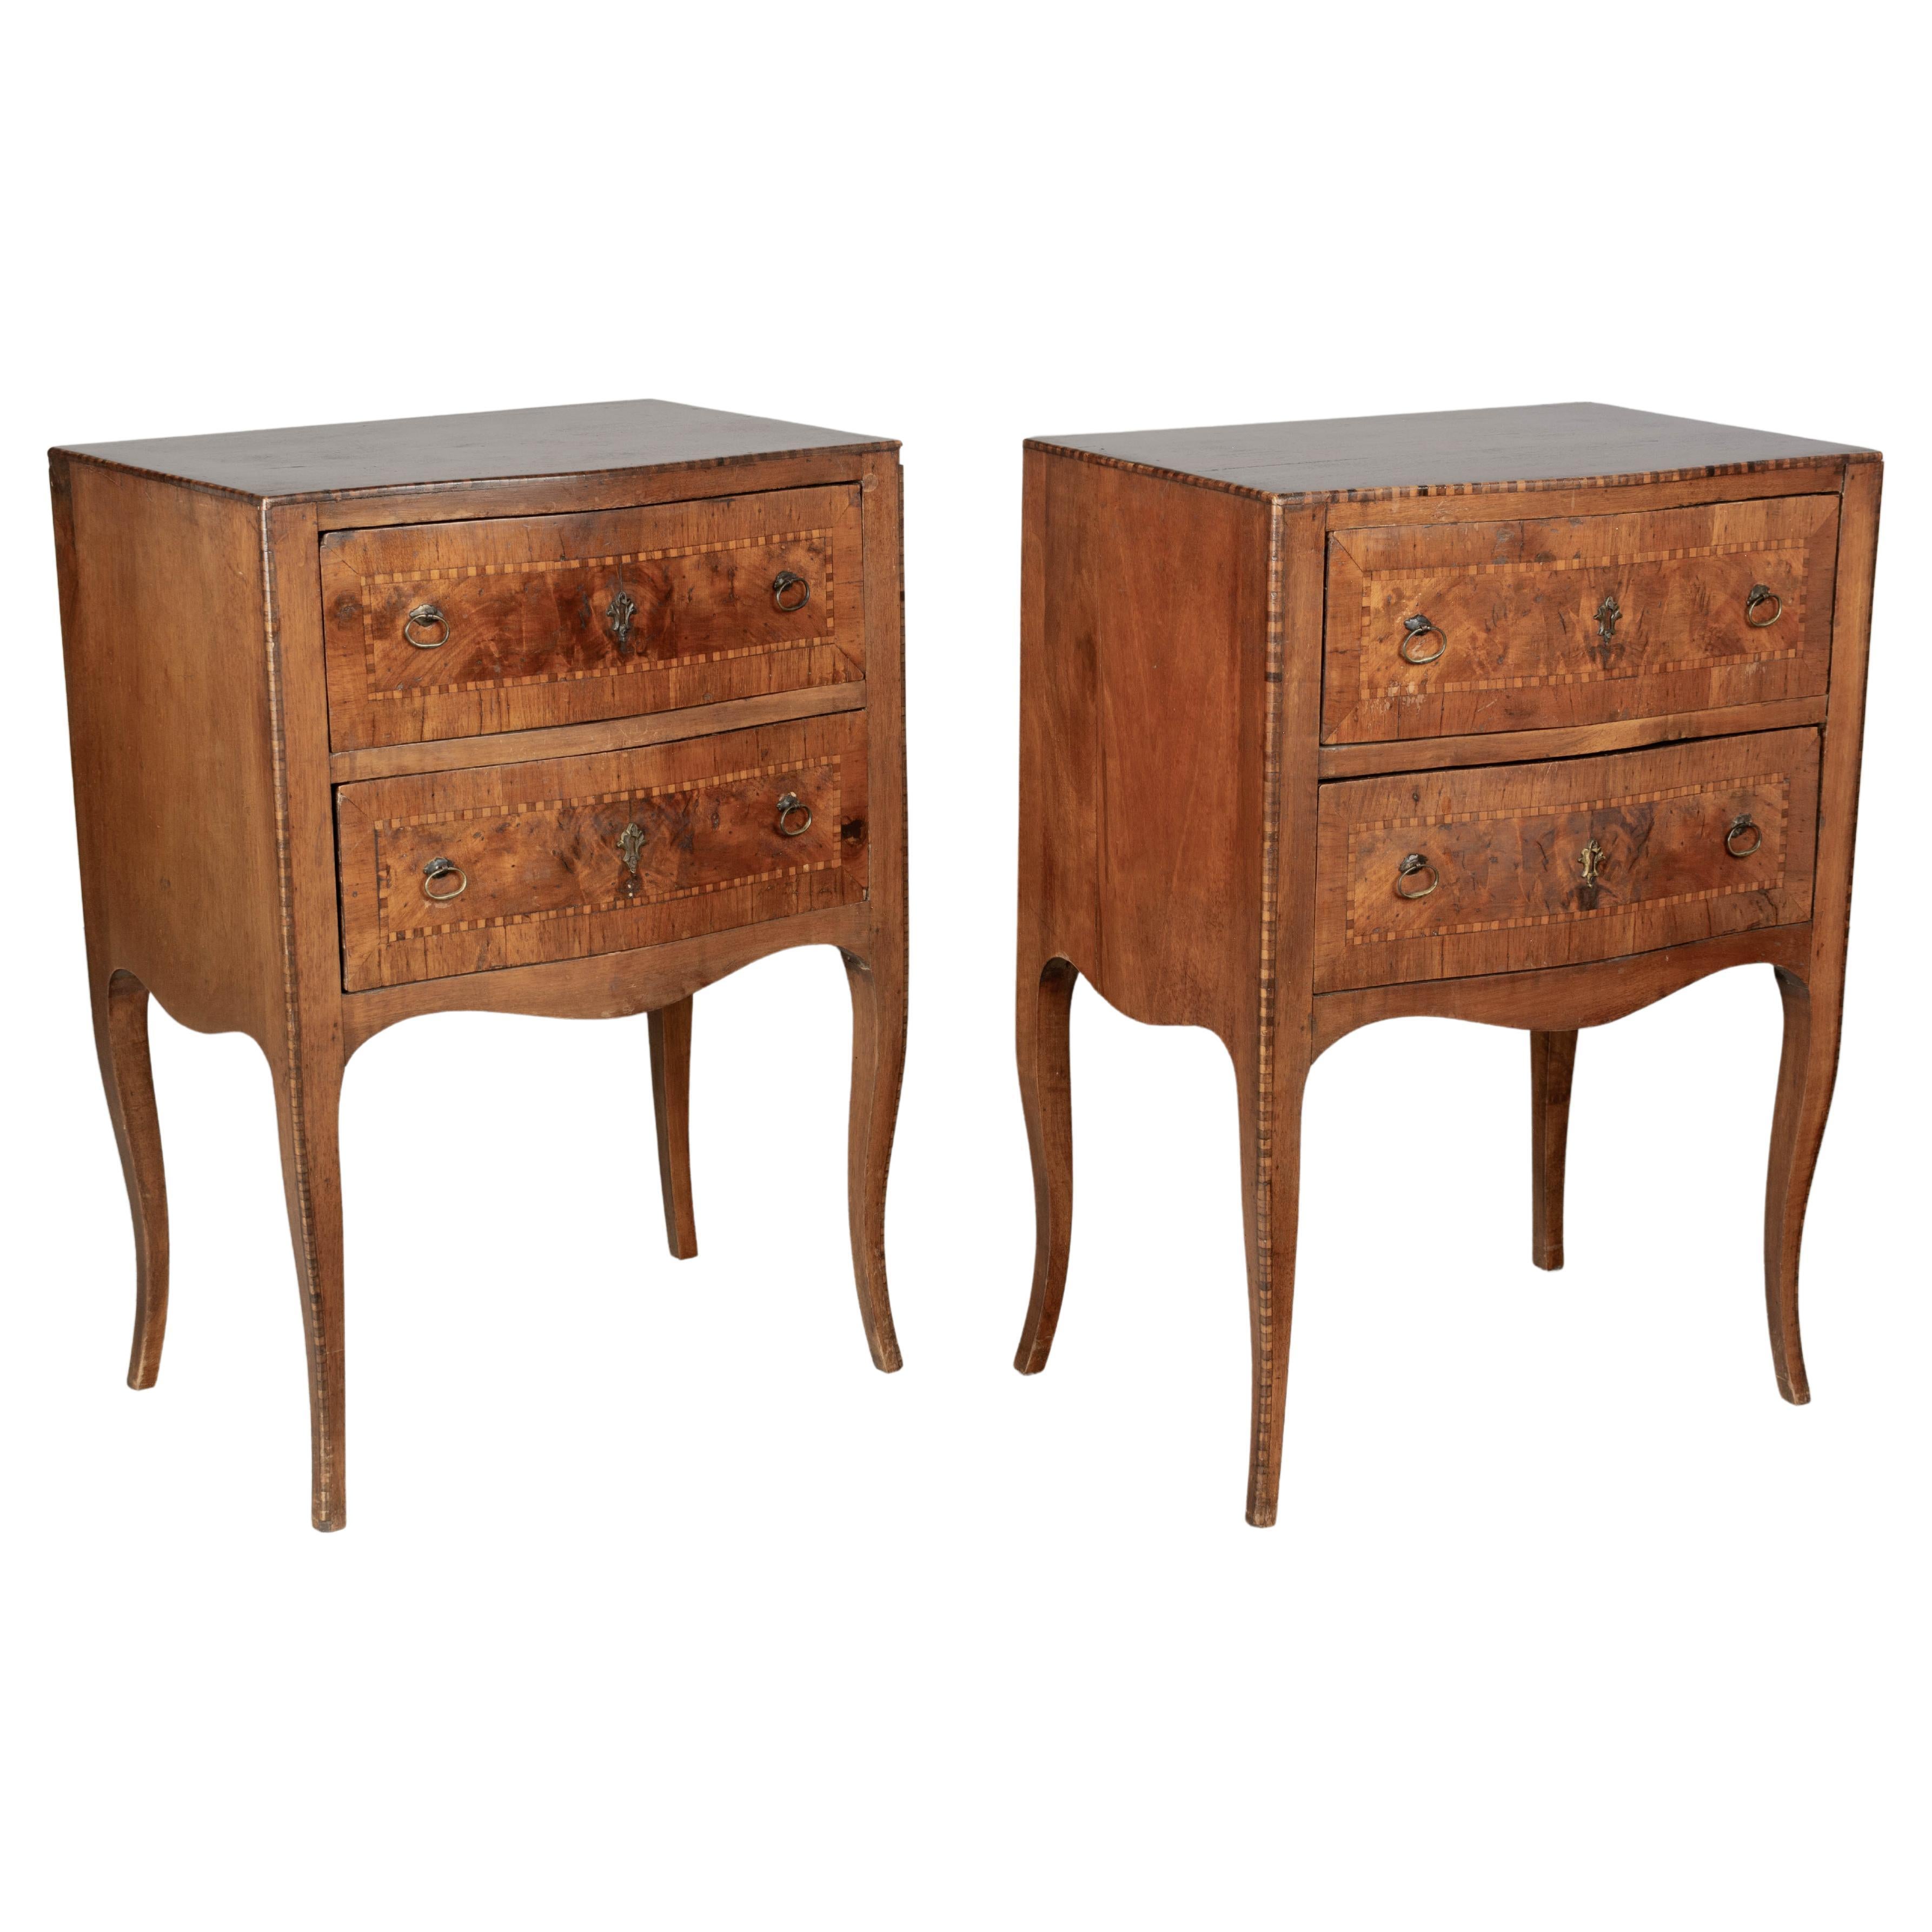 Early 20th Century of Italian Marquetry Commodes Pair